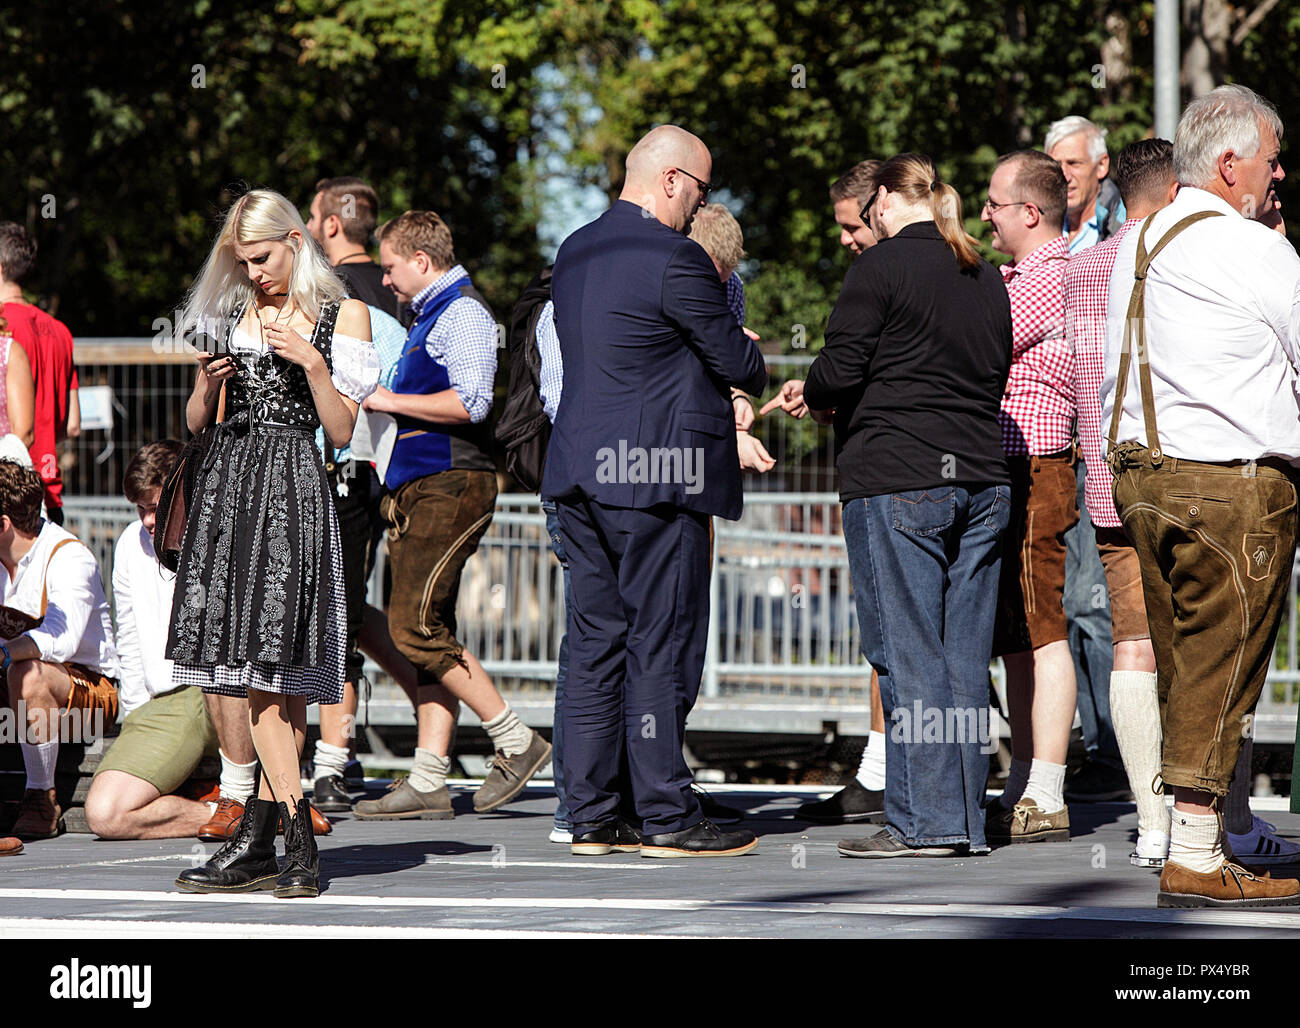 Oktoberfest party goers waiting for the train at Riem Station on the U-Bahn in Munich. Blond German woman holding a mobile phone. Stock Photo